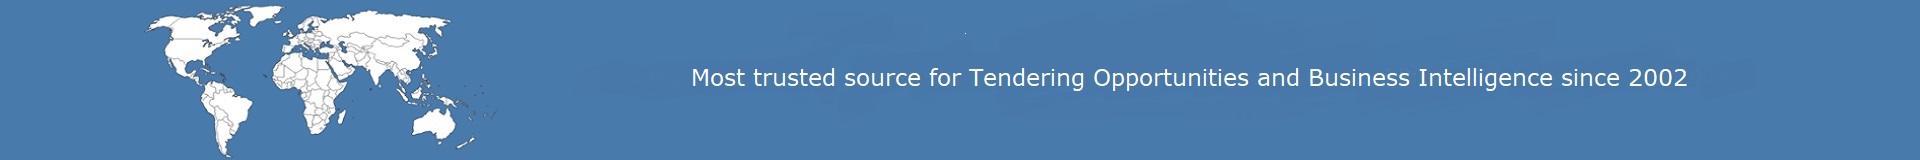 Most trusted source for Tendering Opportunities and Business Intelligence since 2002